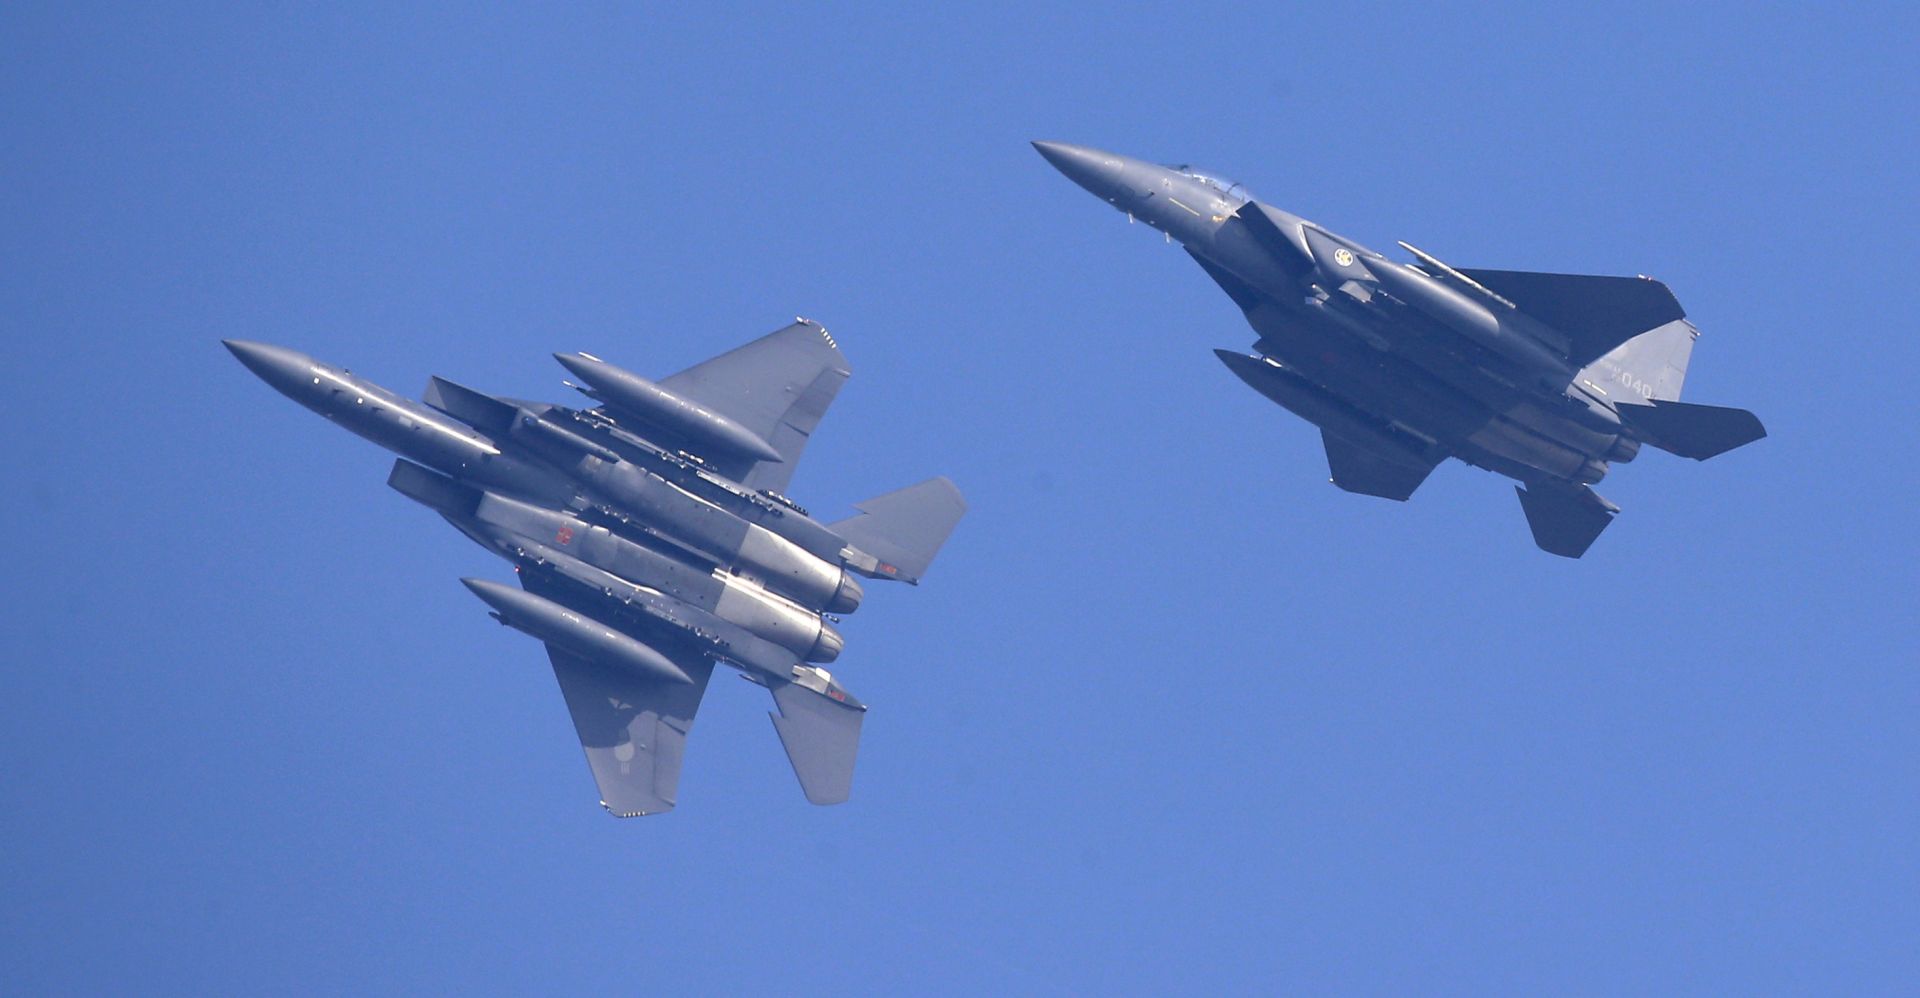 epa07734414 (FILE) - F-15K fighter jets from South Korea's airforce fly above the Osan Air Base during the Invincible Shield exercise, in Pyeongtaek, south of Seoul, South Korea, 08 November 2016 (reissued 23 July 2019). According to media reports on 23 July 2019, a Russian military plane violated South Korean airspace, prompting South Korean milirary officials to fire a warning shot and deploy F-15K and F-16K fighter jets to intercept the plane. The incident occured near the Dokdo islets.  EPA/JEON HEON-KYUN